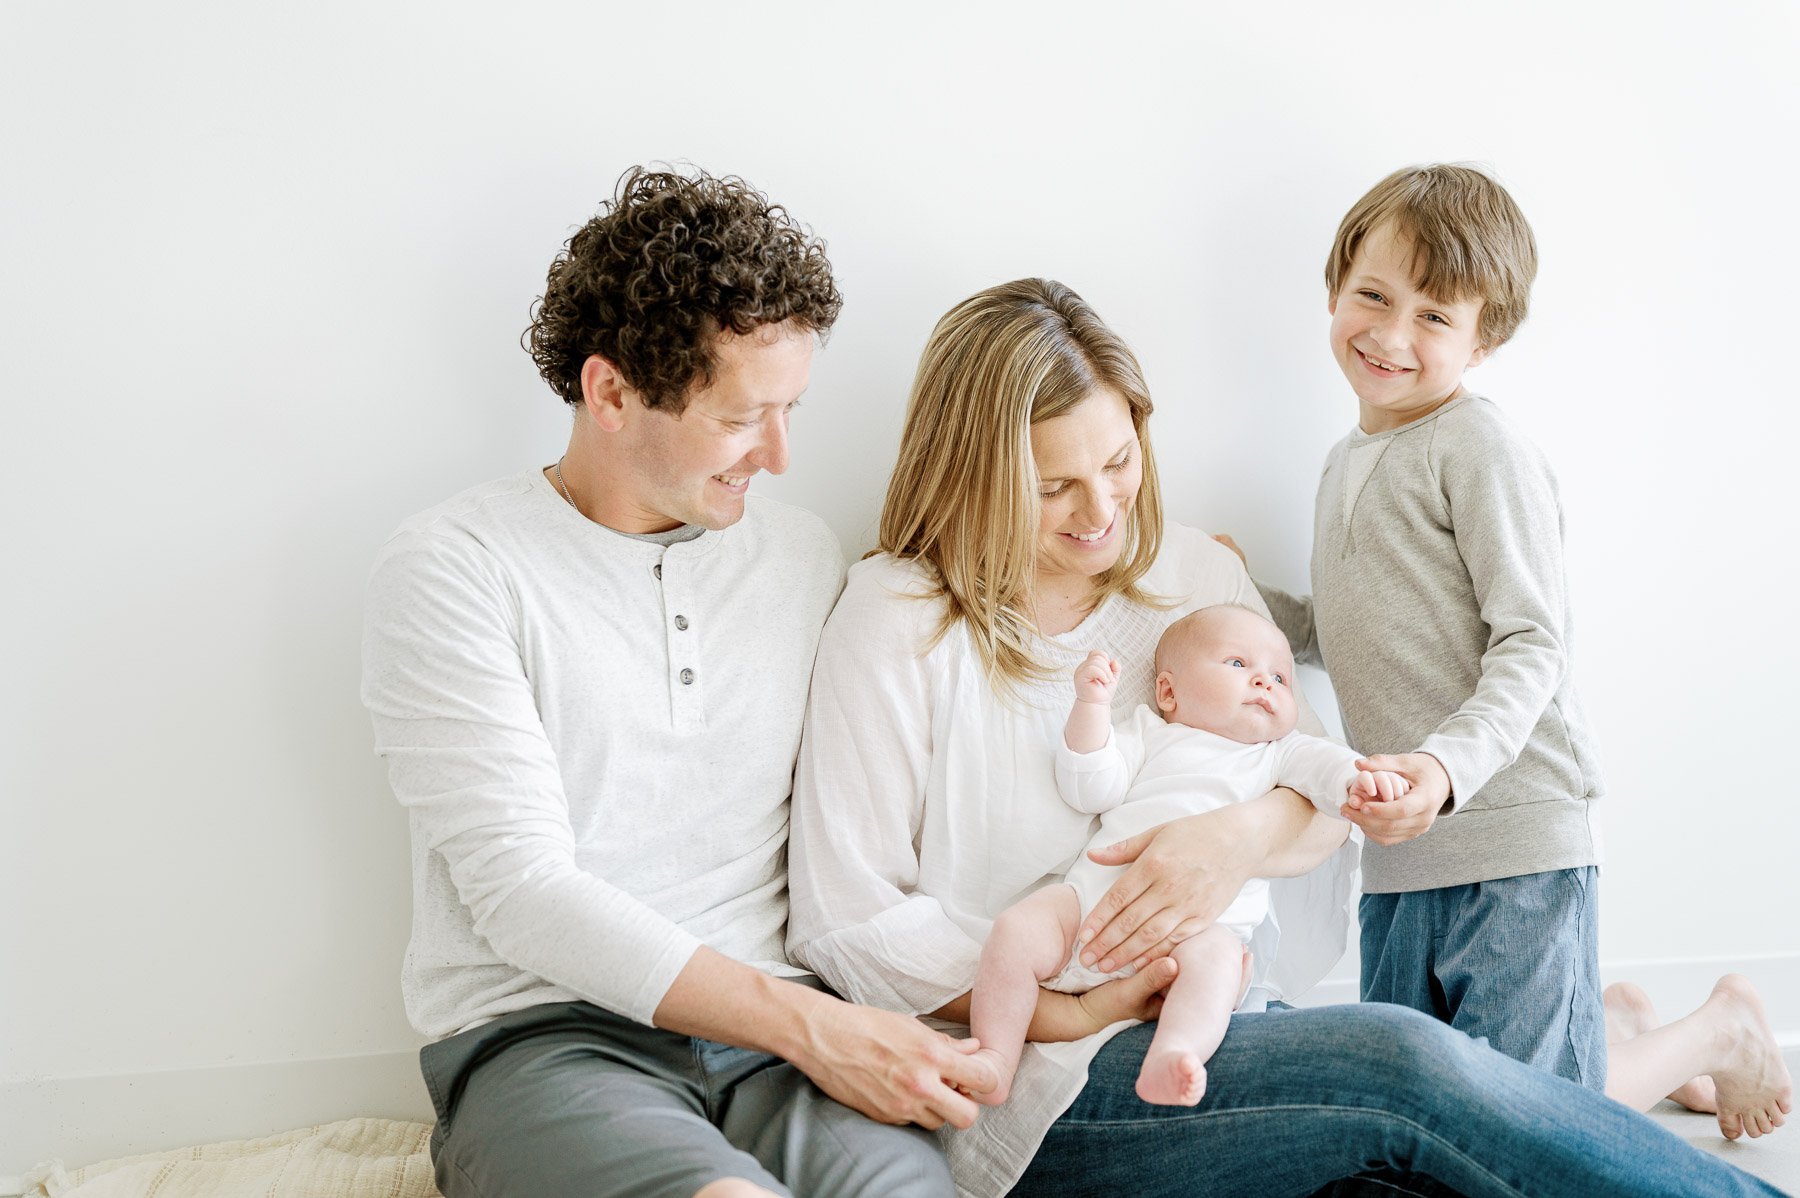 Troy NY Studio Family Photography by Michelle Lange Photography-4.jpg